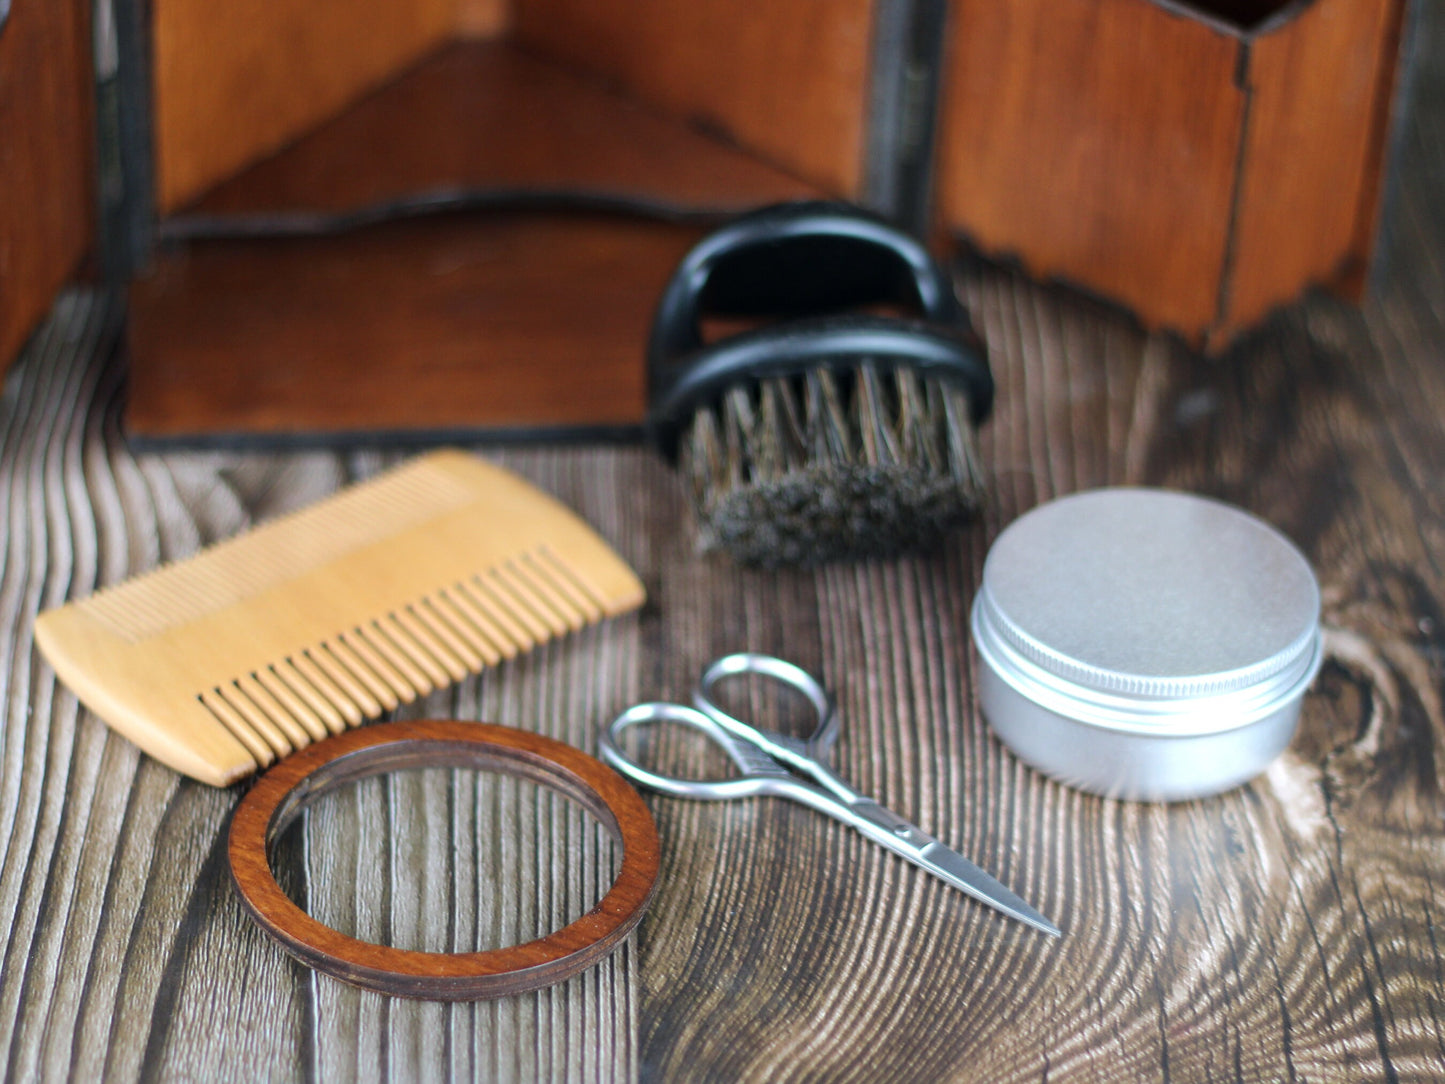 Beard care set in wooden cabinet with mirror, brush, comb and scissors. Edwardian style male grooming kit.